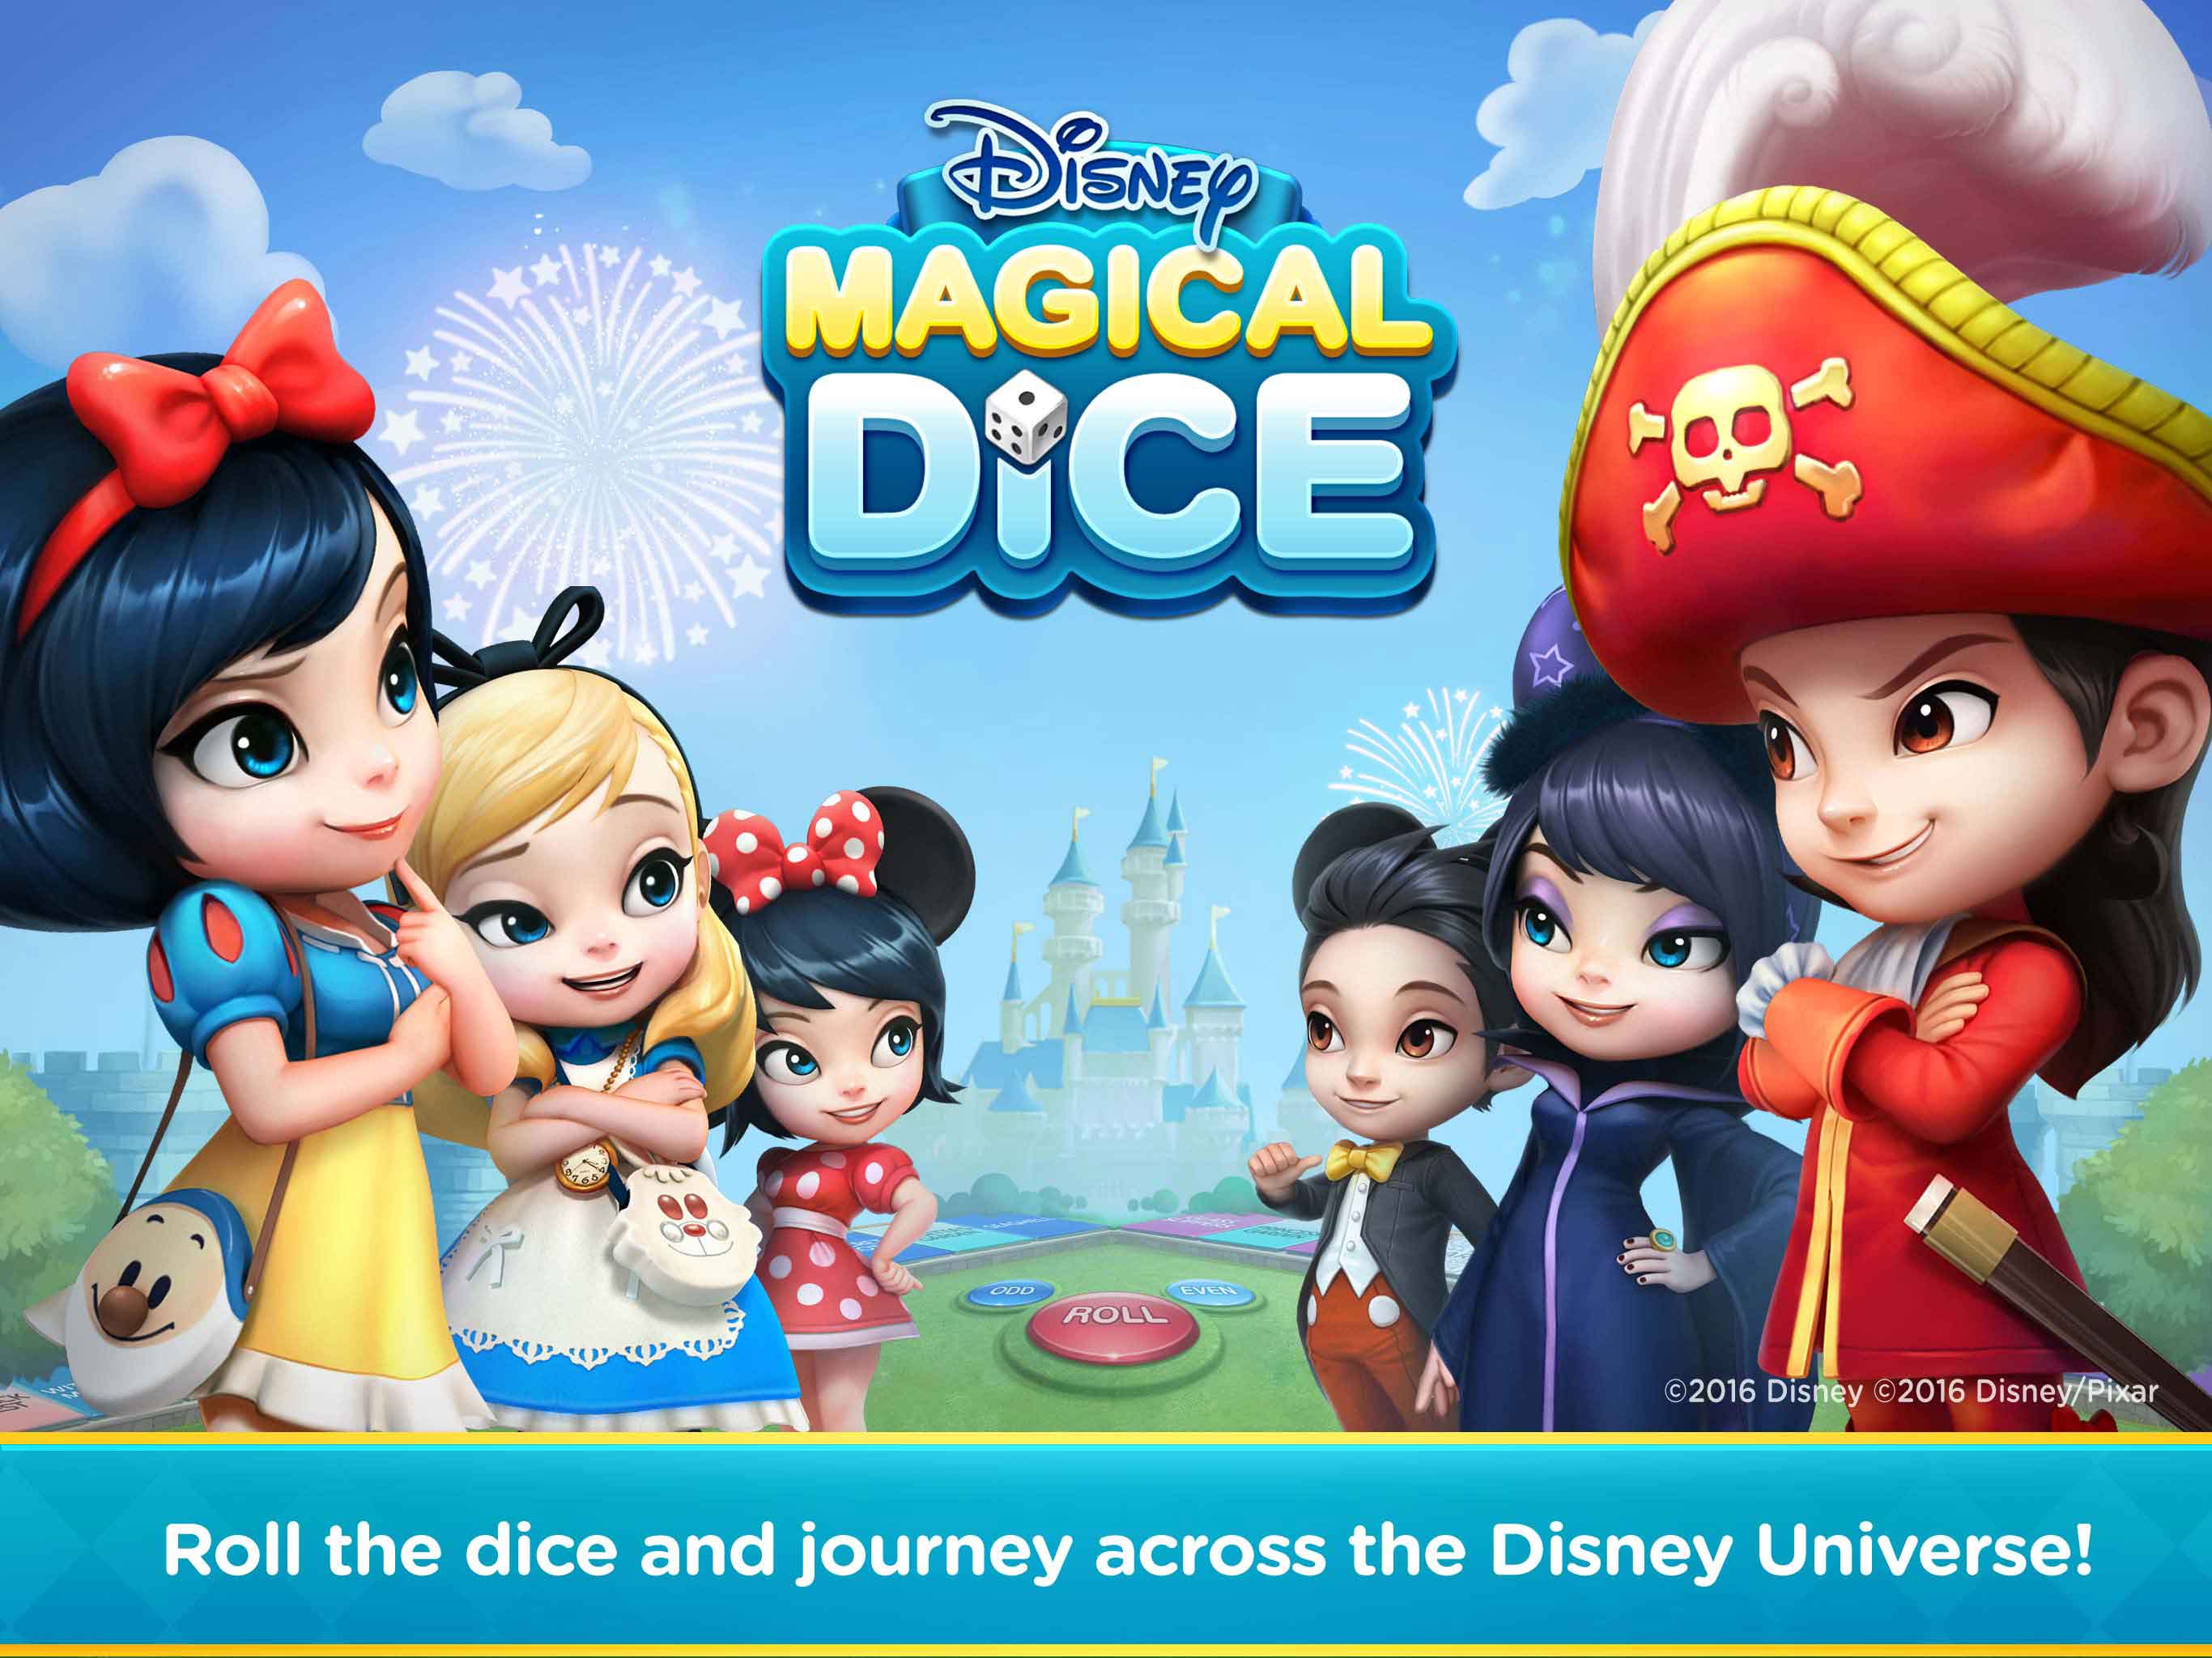 Disney Magical Dice Now Live Globally in 155 Countries